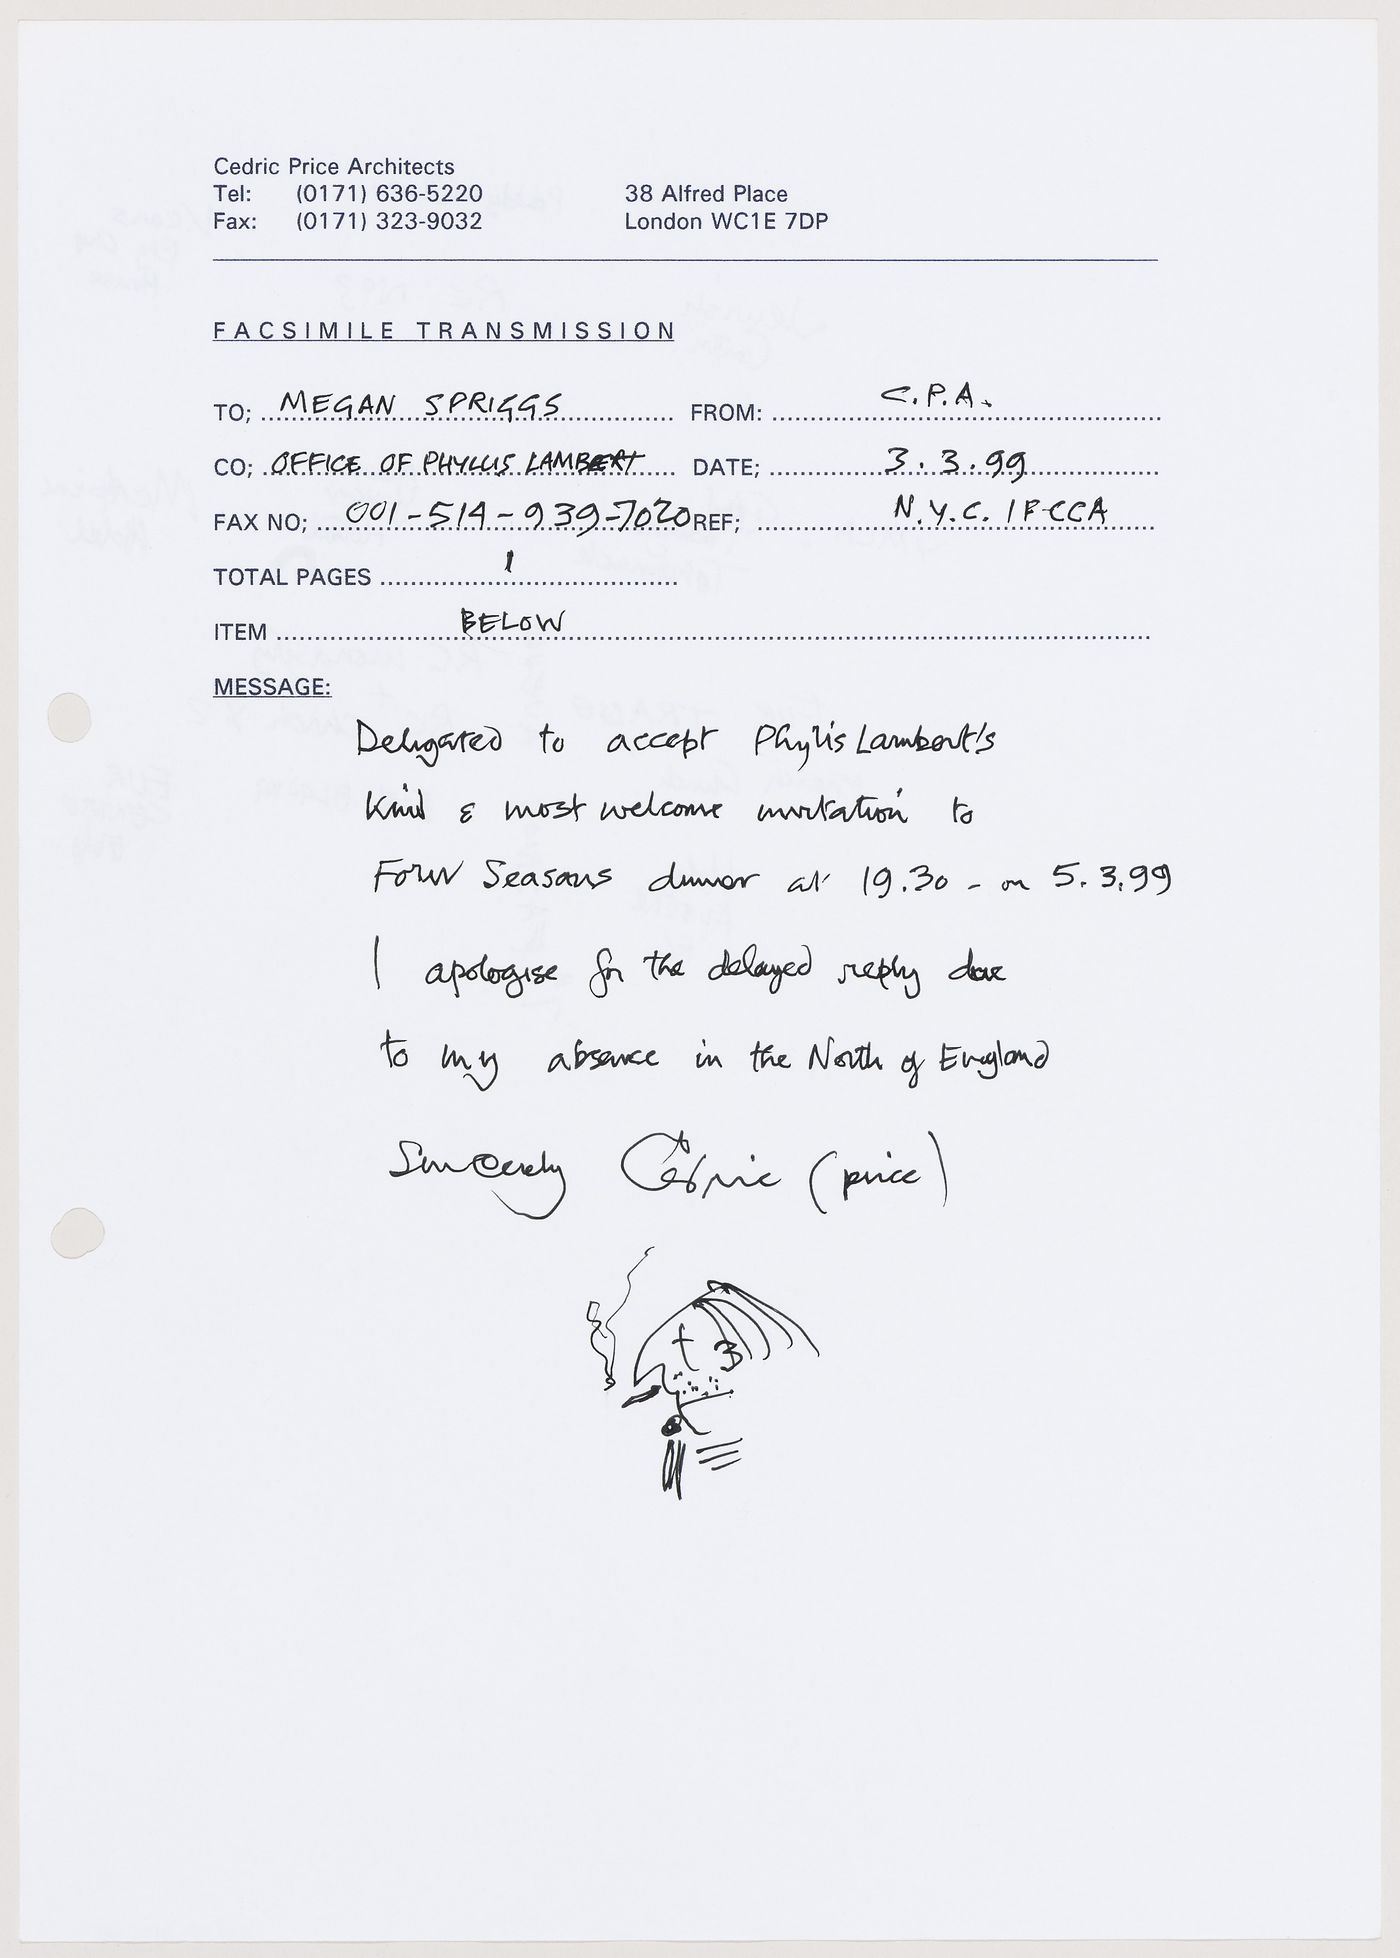 Facsimile transmission (fax) with message and self-portrait sketch sent to the office of Phyllis Lambert